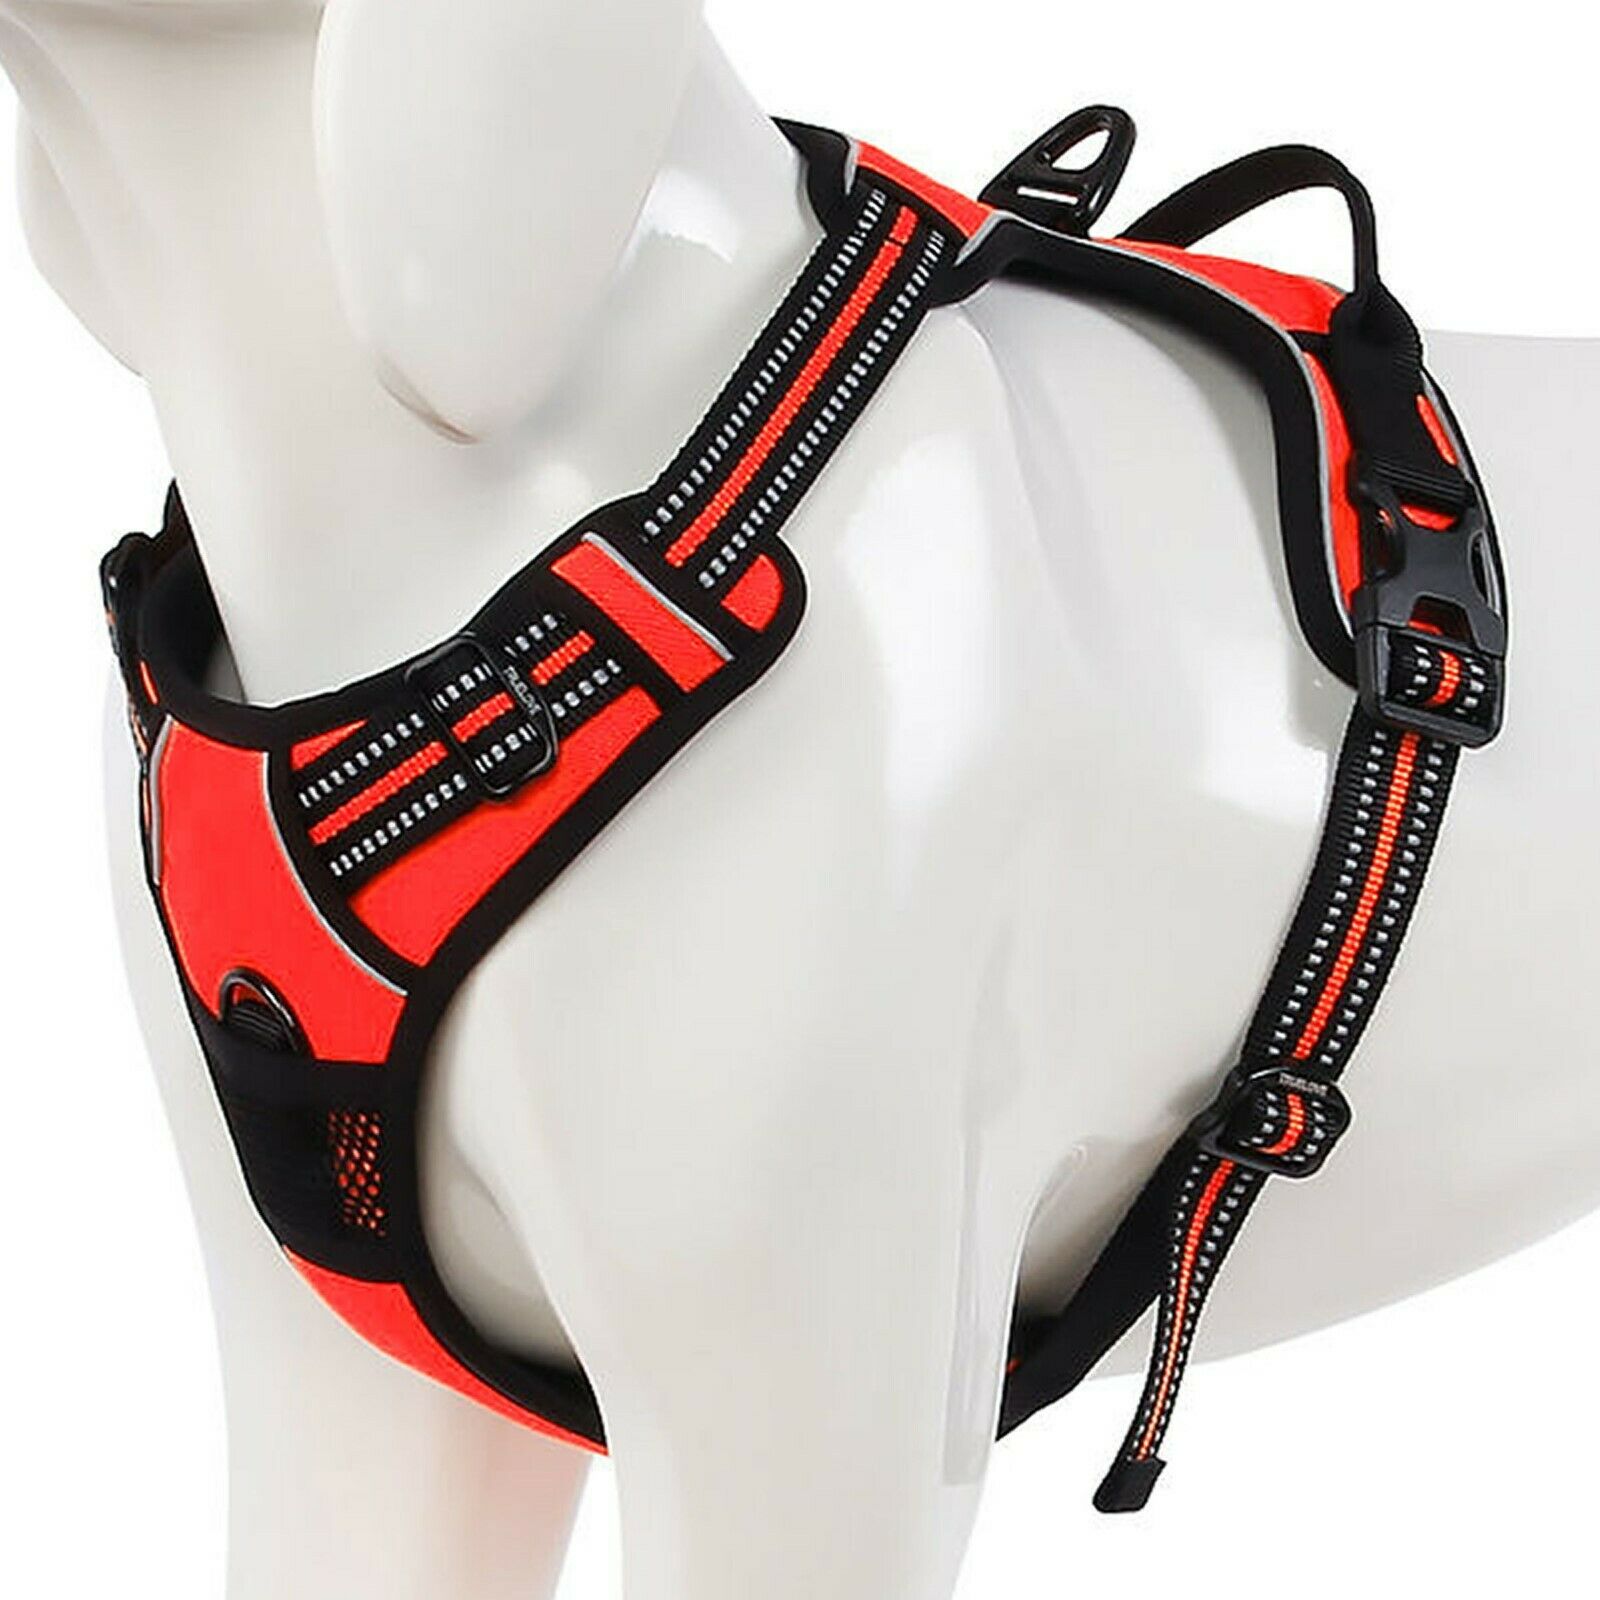 Petnsport Dog Harness No Pull - Heavy Duty, Adjustable Vest With 2 Leash Clips